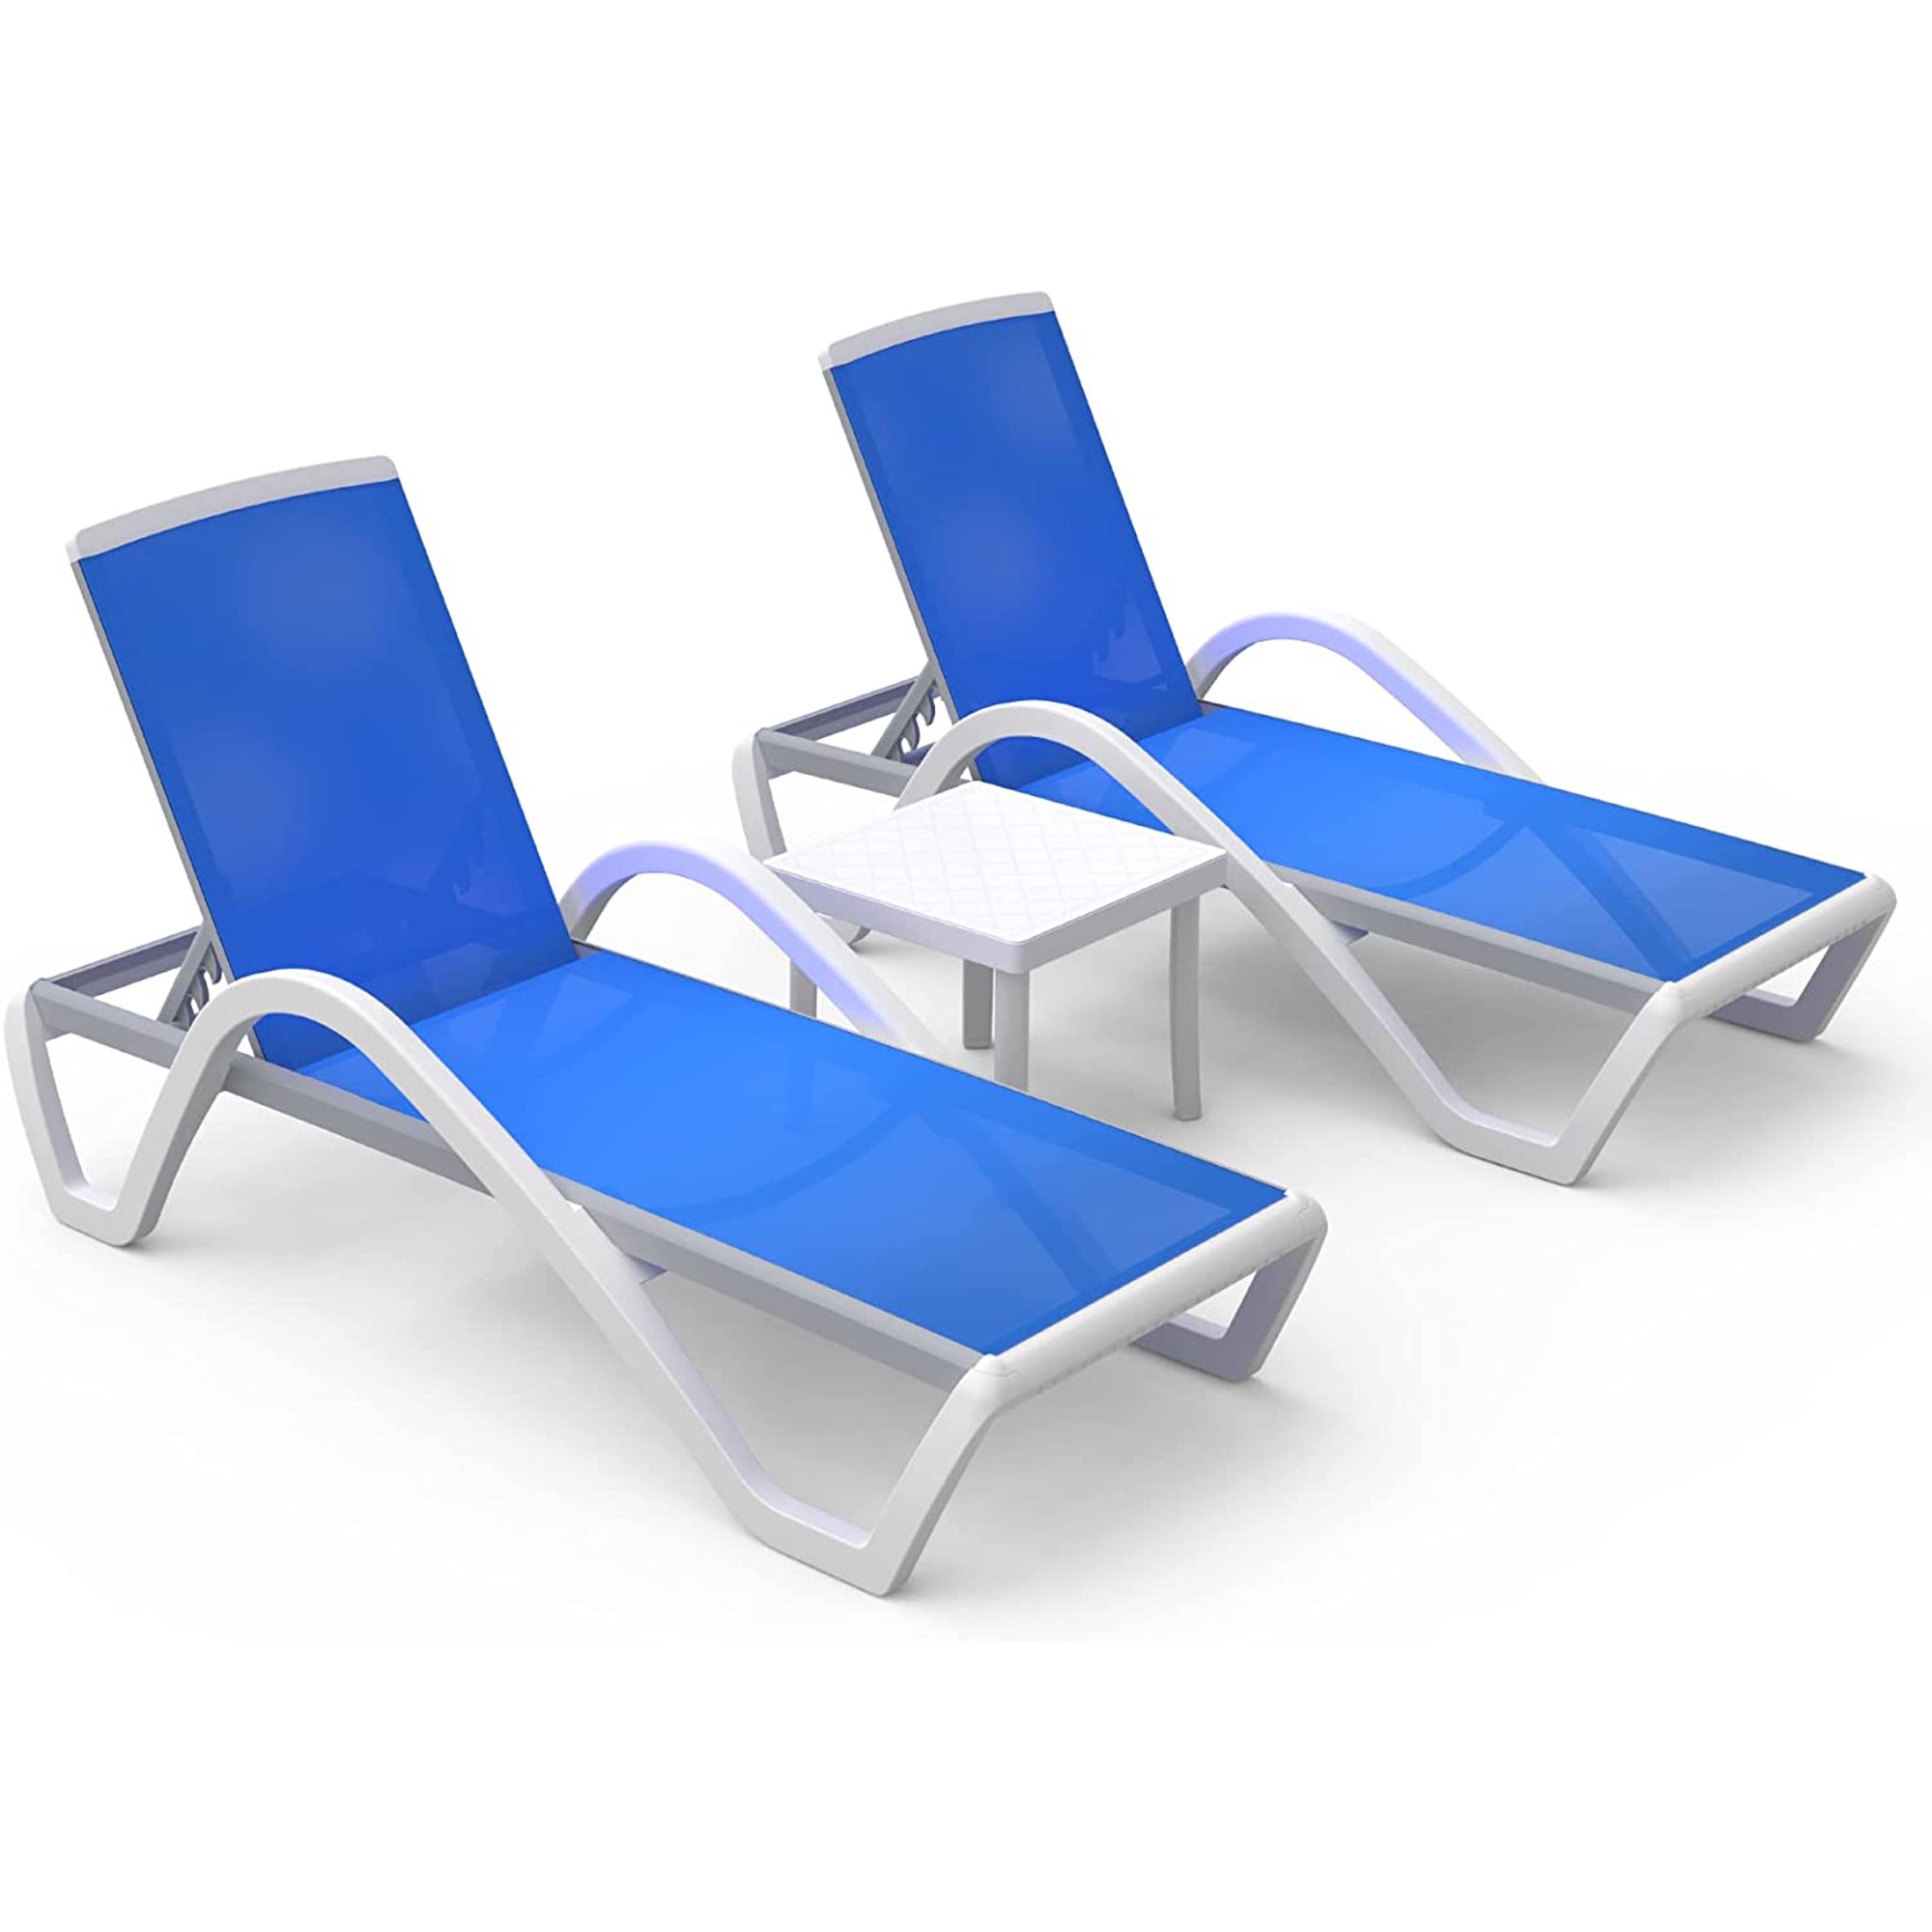 Domi Patio Chaise Lounge Chair Set of 3,Outdoor Aluminum Polypropylene Sunbathing Chair with Adjustable Backrest,Arm,Side Table,for Beach,Yard,Balcony,Poolside(2 Blue Chairs W/Table) - image 3 of 8